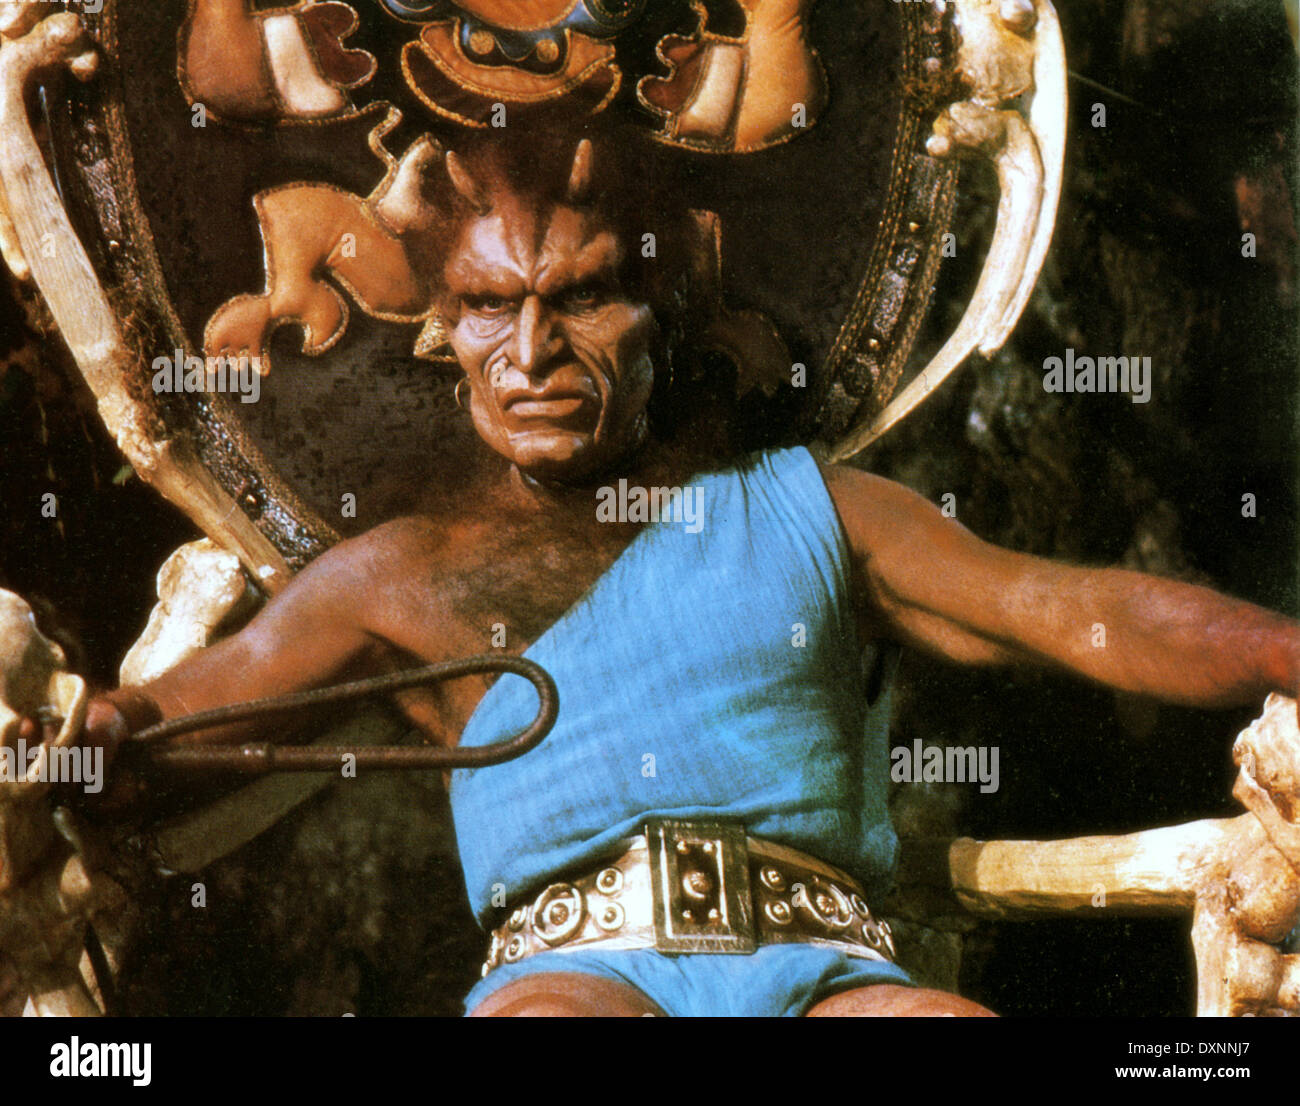 Clash of the titans movie hi-res stock photography and images - Alamy